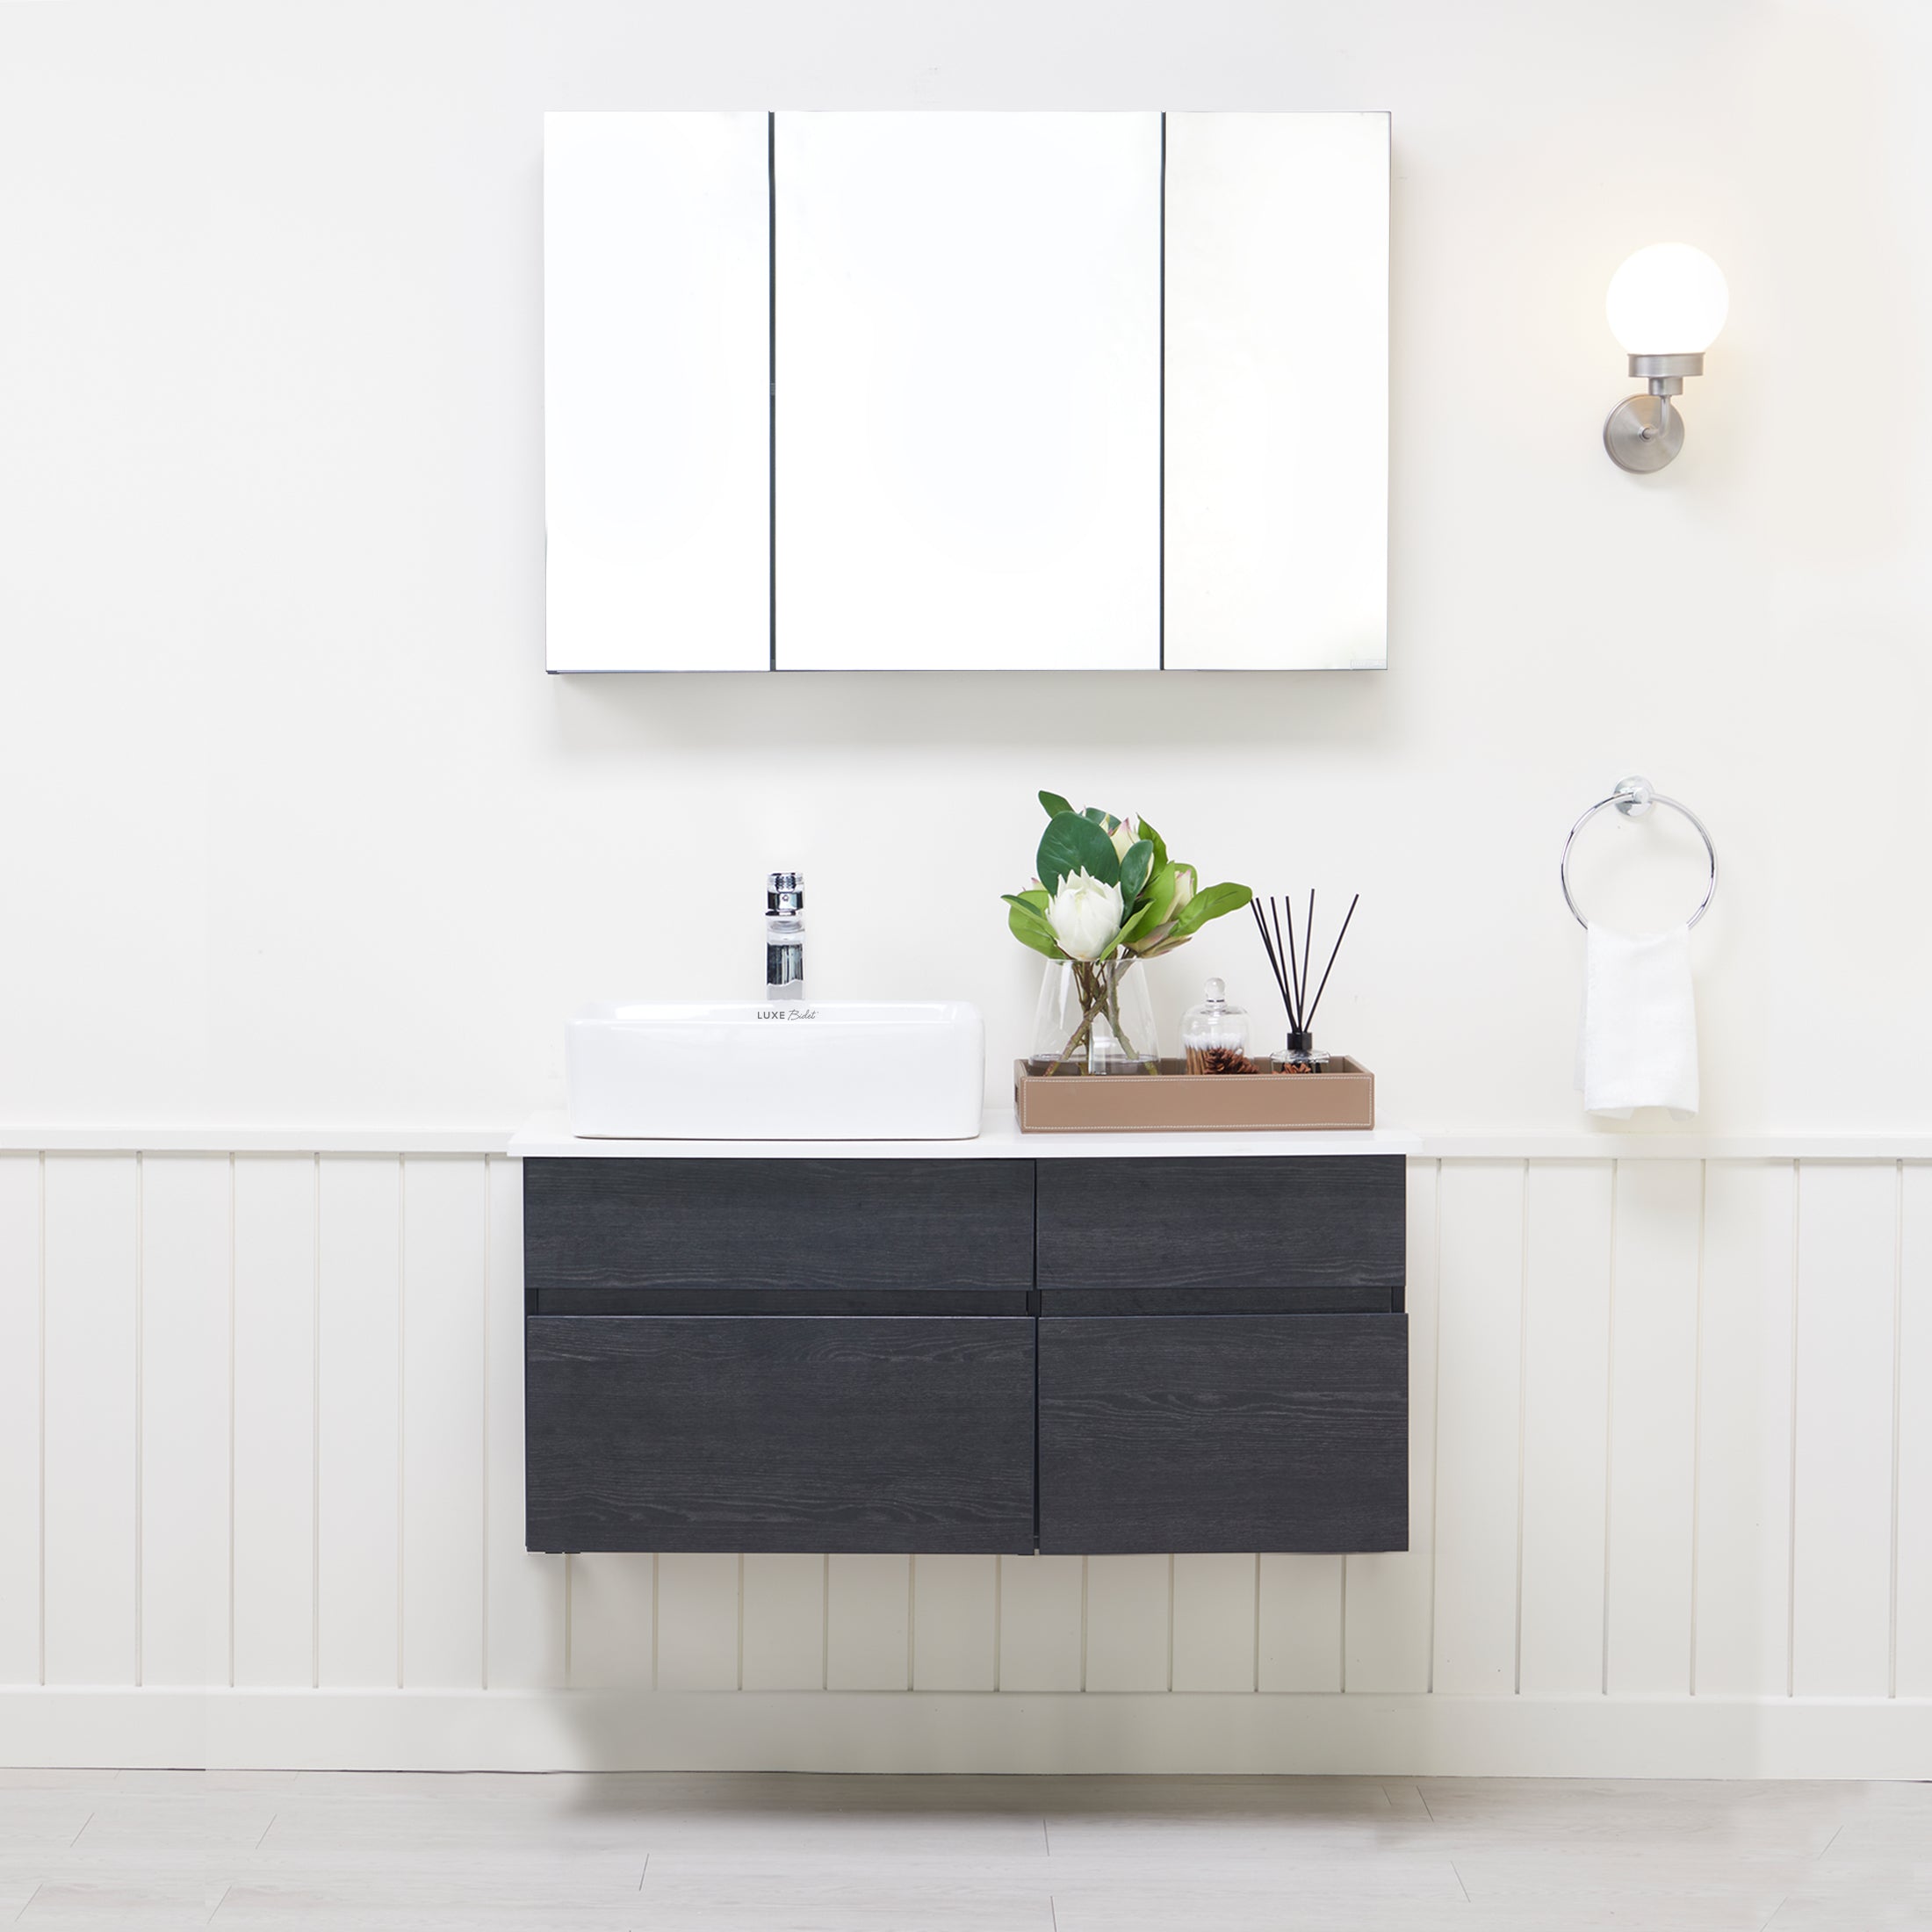 Sophea Bathroom Vanity Set, front-facing with bathroom décor & toiletries on counter and in cabinets